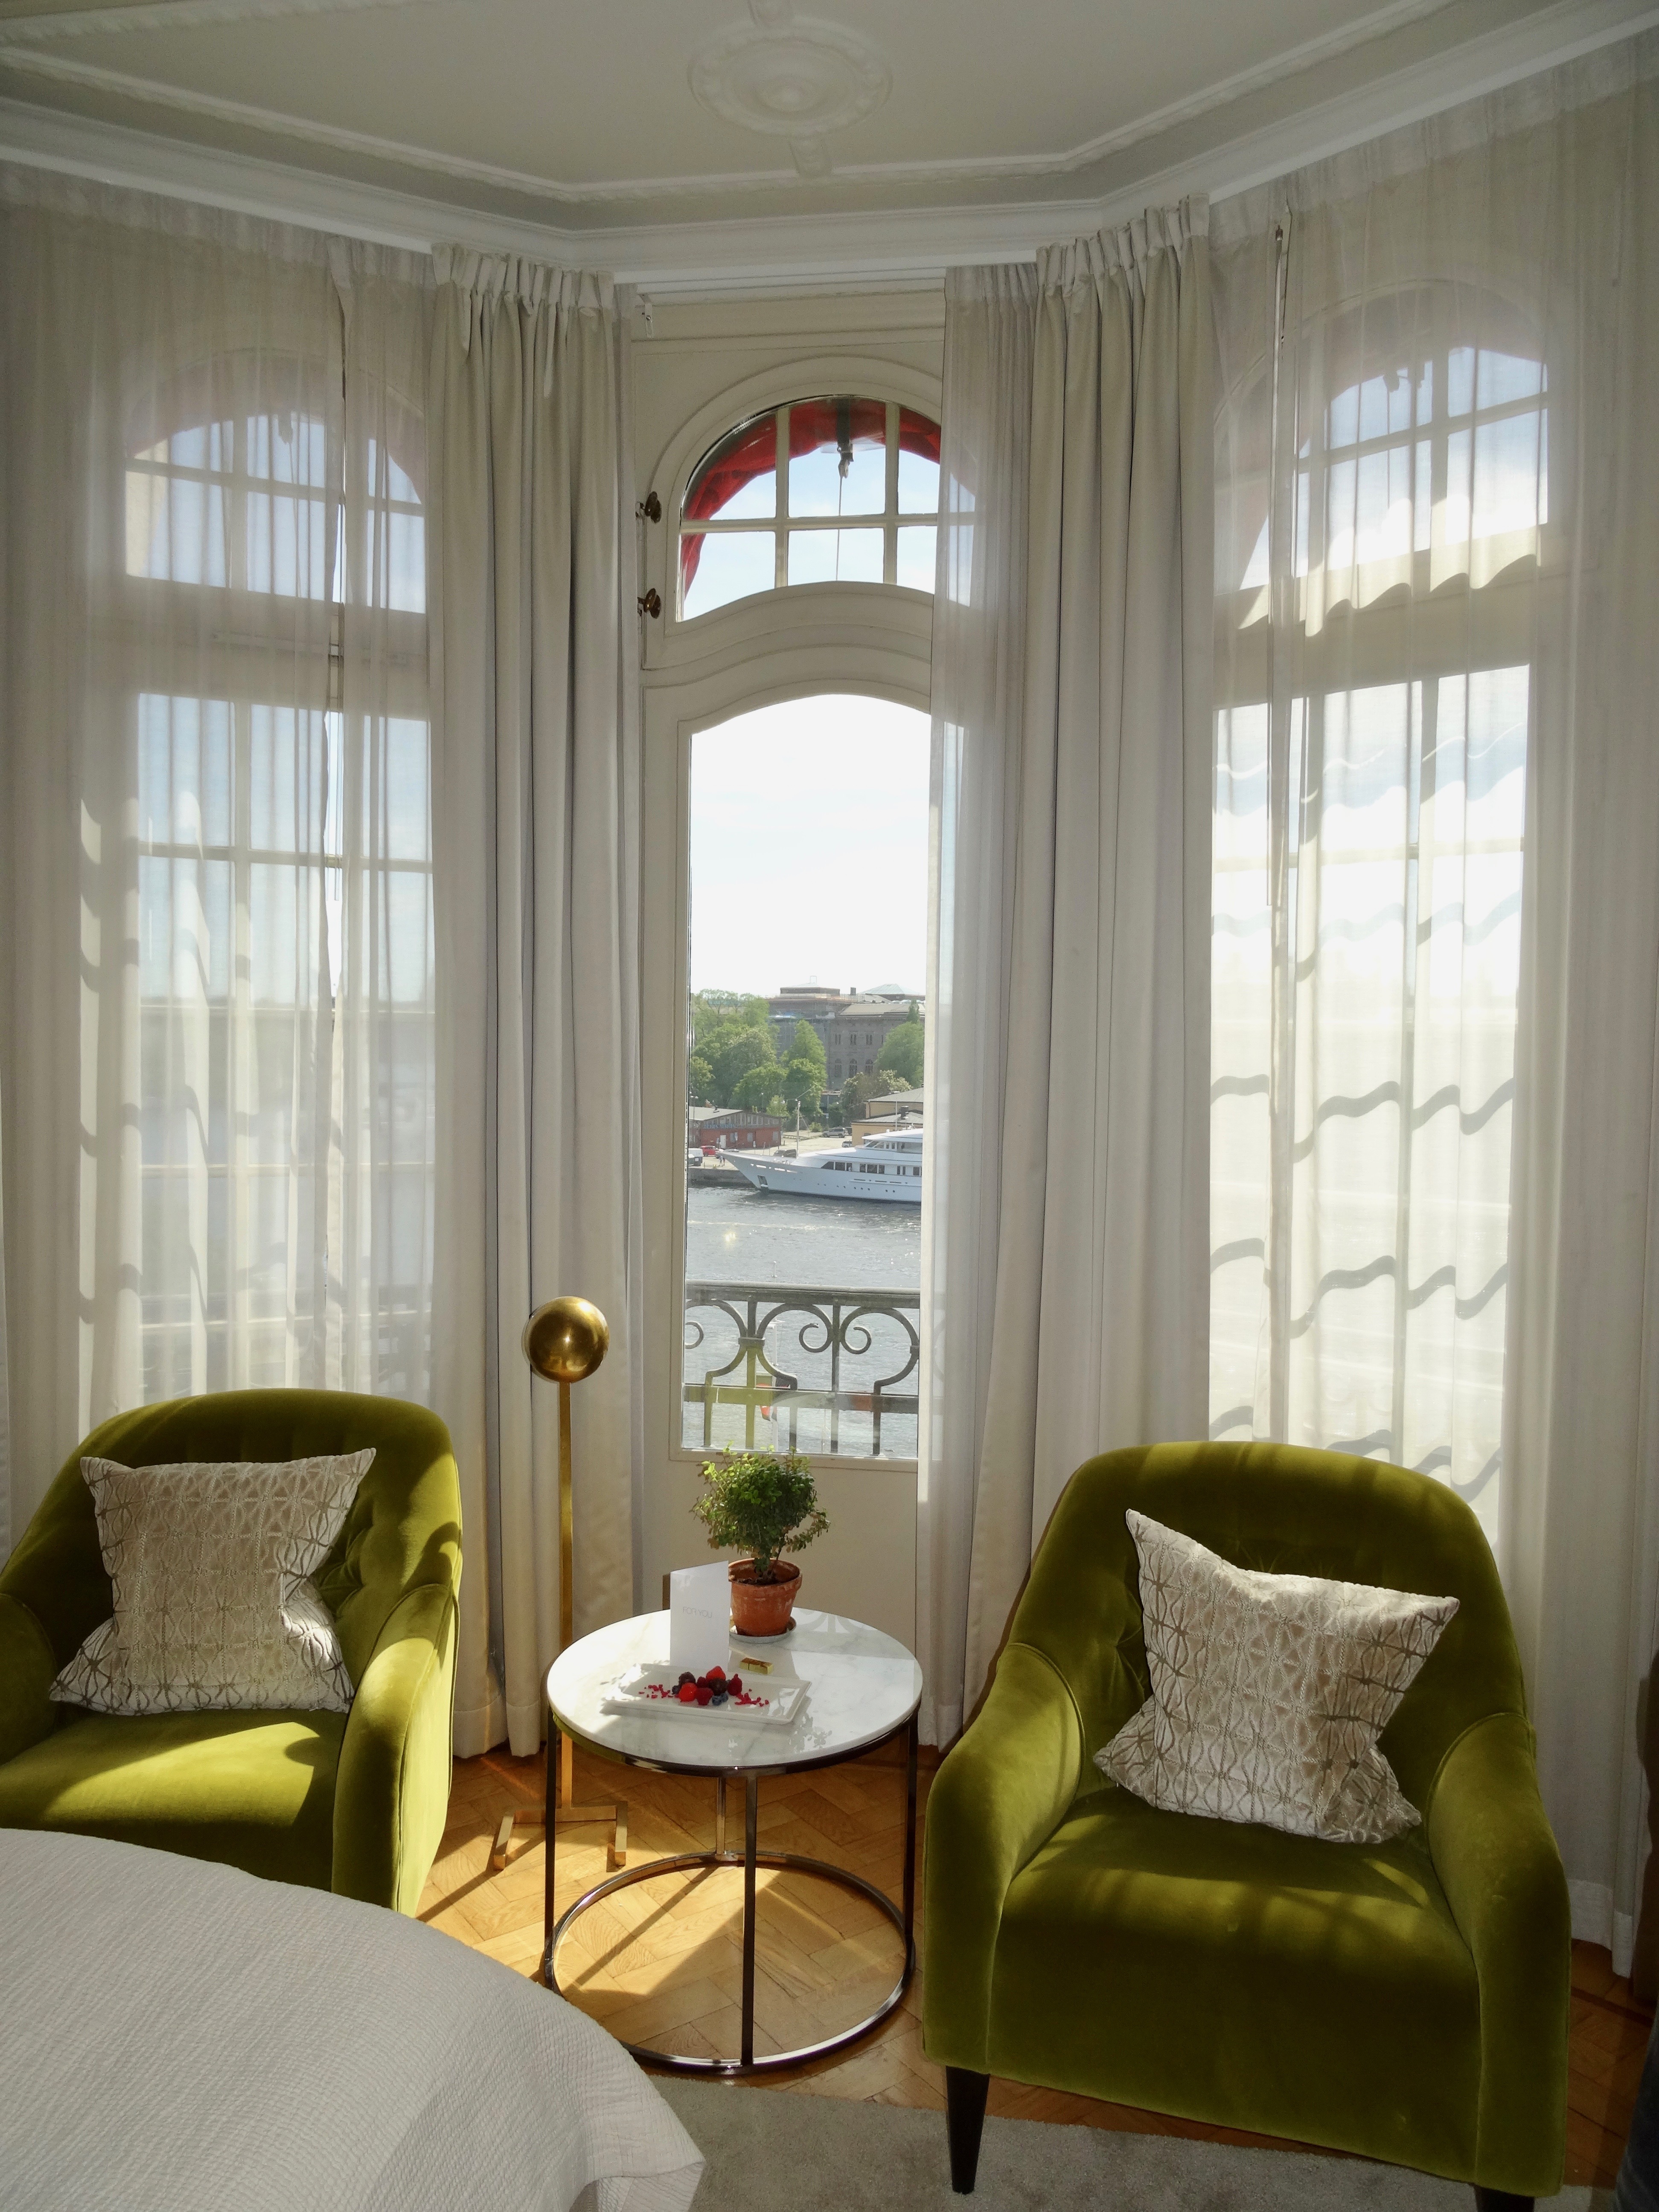 Sea View Room at the Hotel Diplomat Stockholm